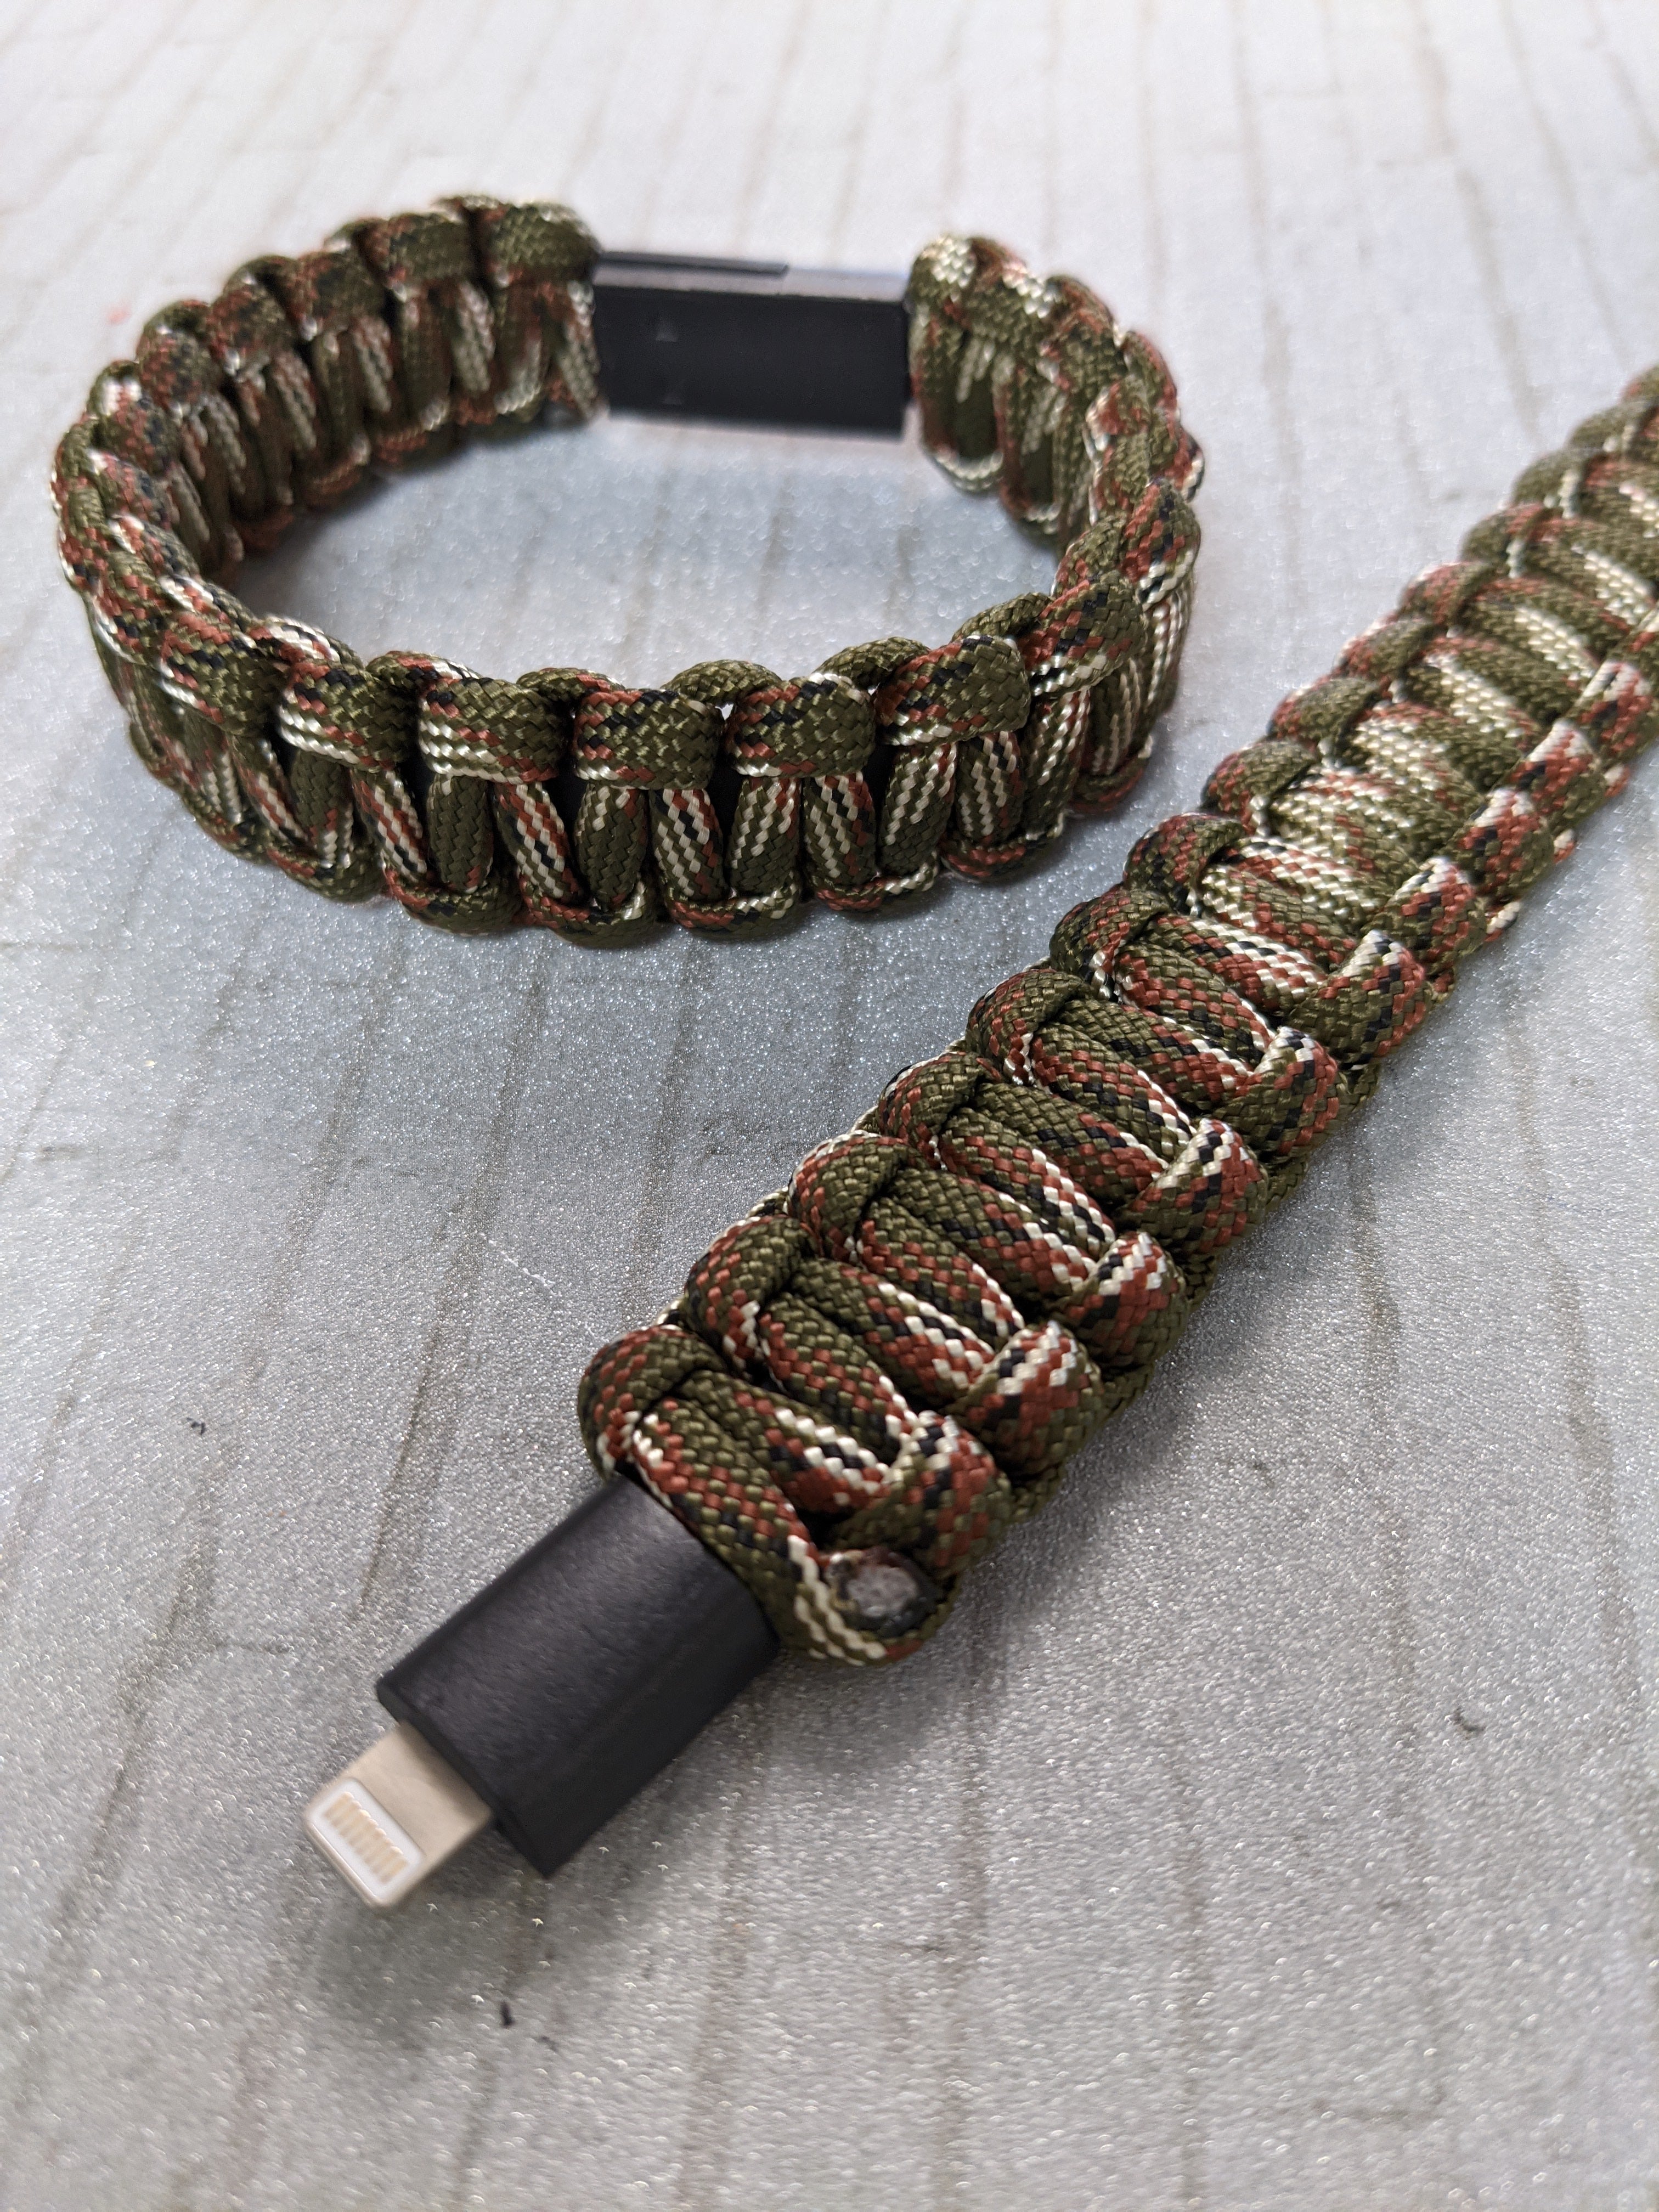 USB Cable Bracelet for iPhone or Android Type C